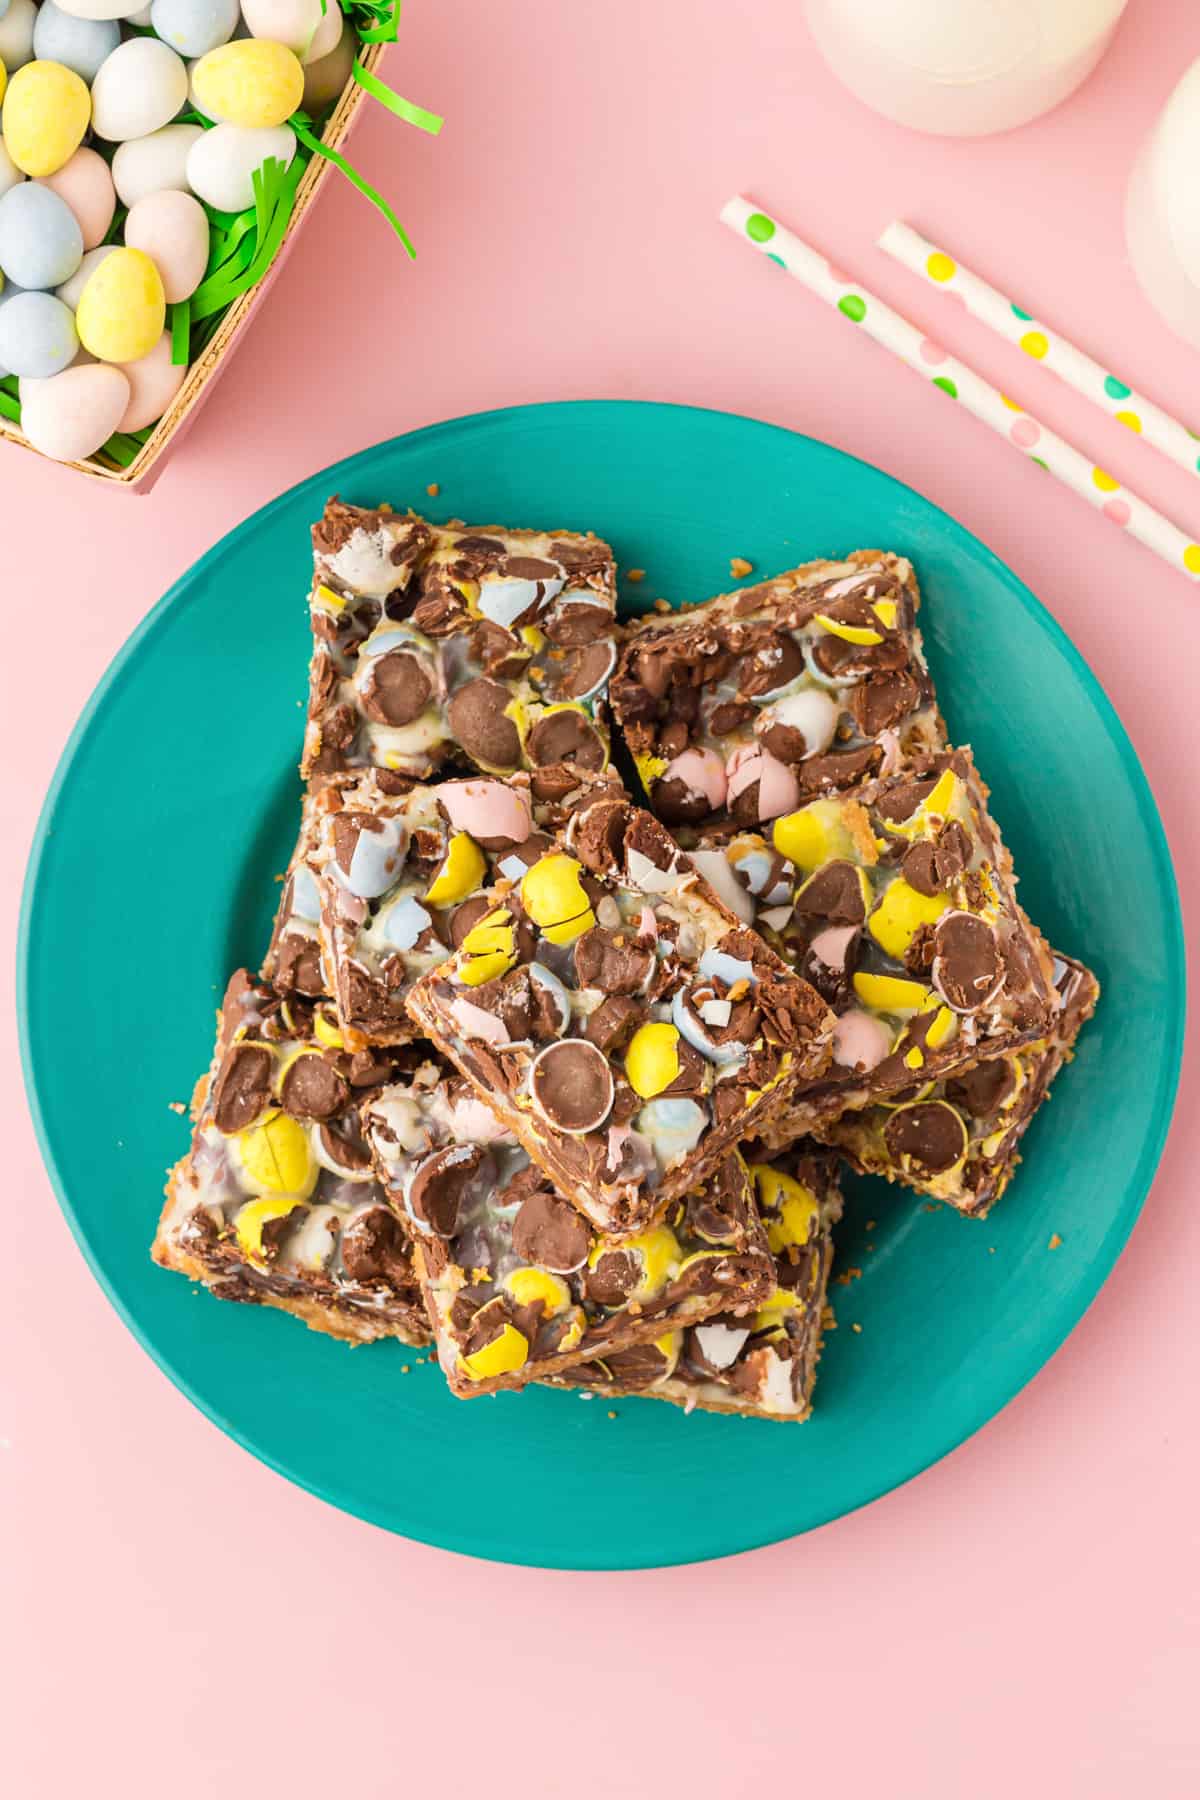 Top-down photo of mini egg cookie bars just into squares and laid on teal plate. Mini chocolate eggs, paper straws, and glasses of milk are in background.